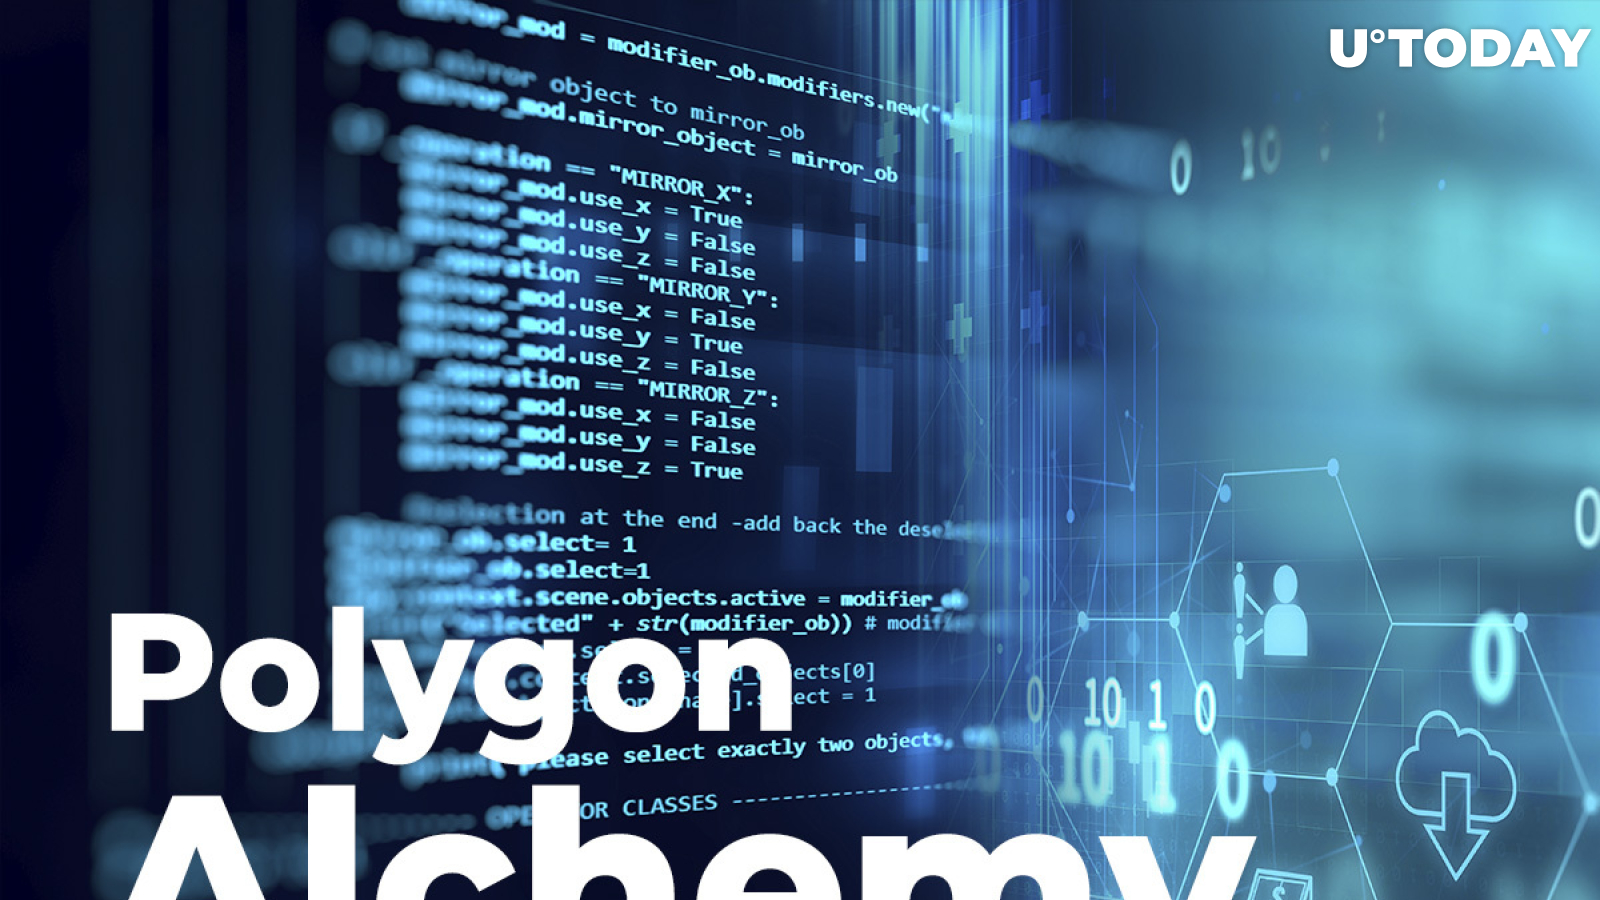 Polygon (MATIC) Now Supported by Alchemy Development Platform. Why Is It Crucial?